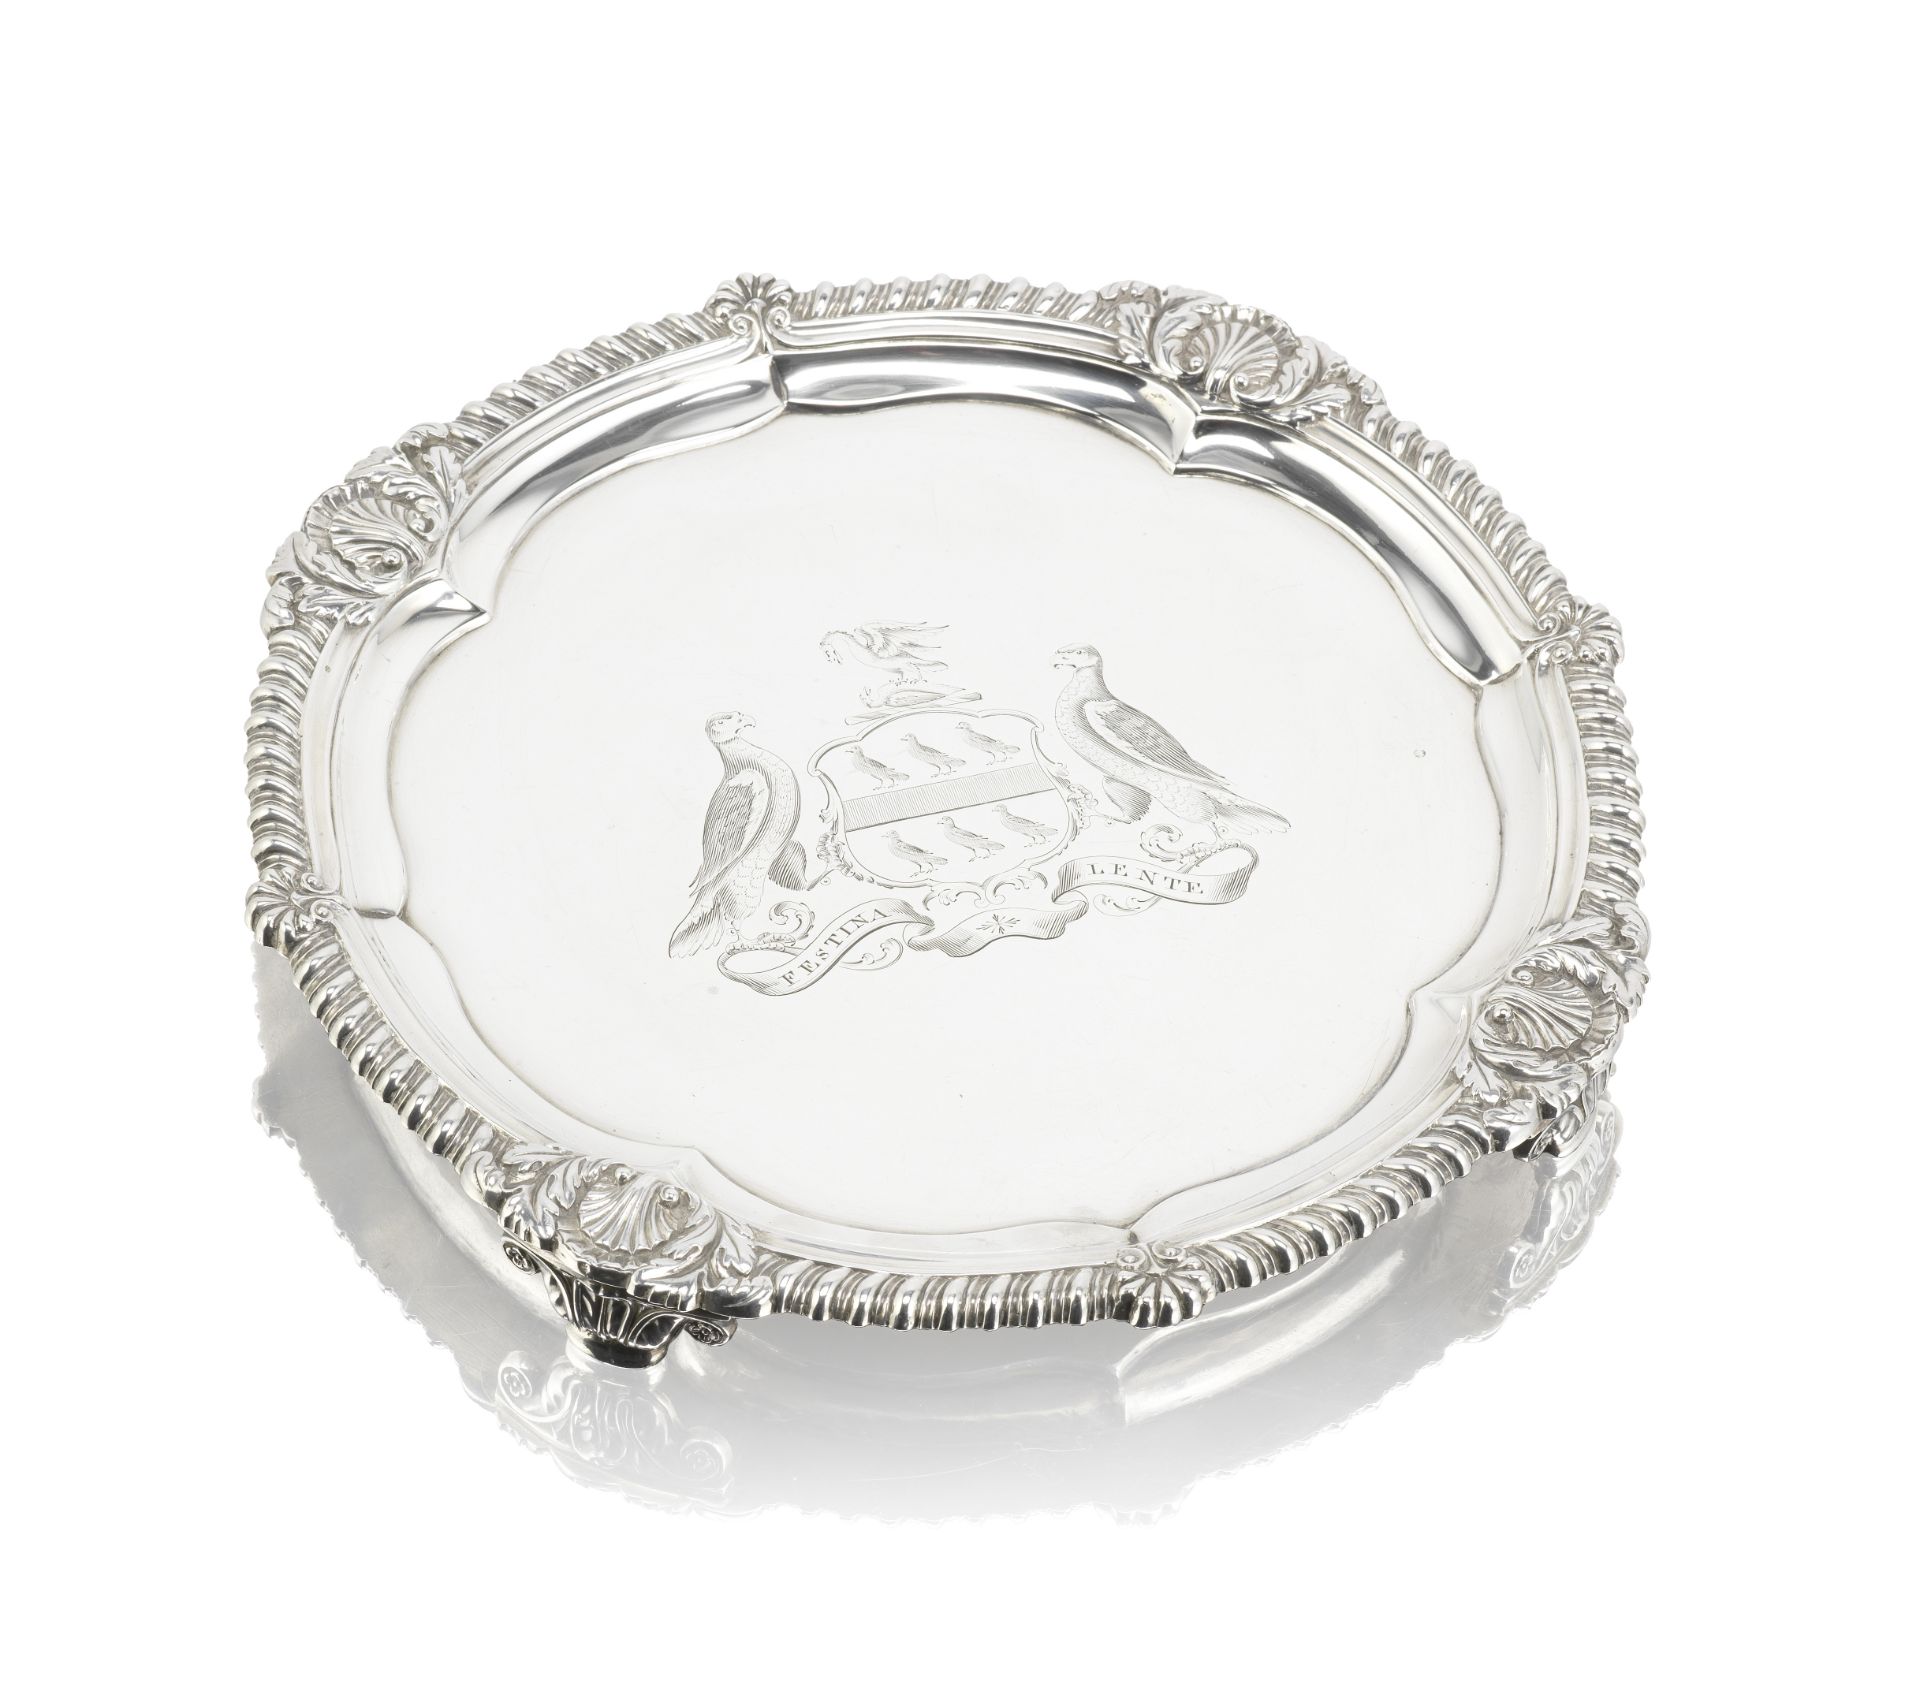 A George III silver salver from the Onslow service Paul Storr, London 1812